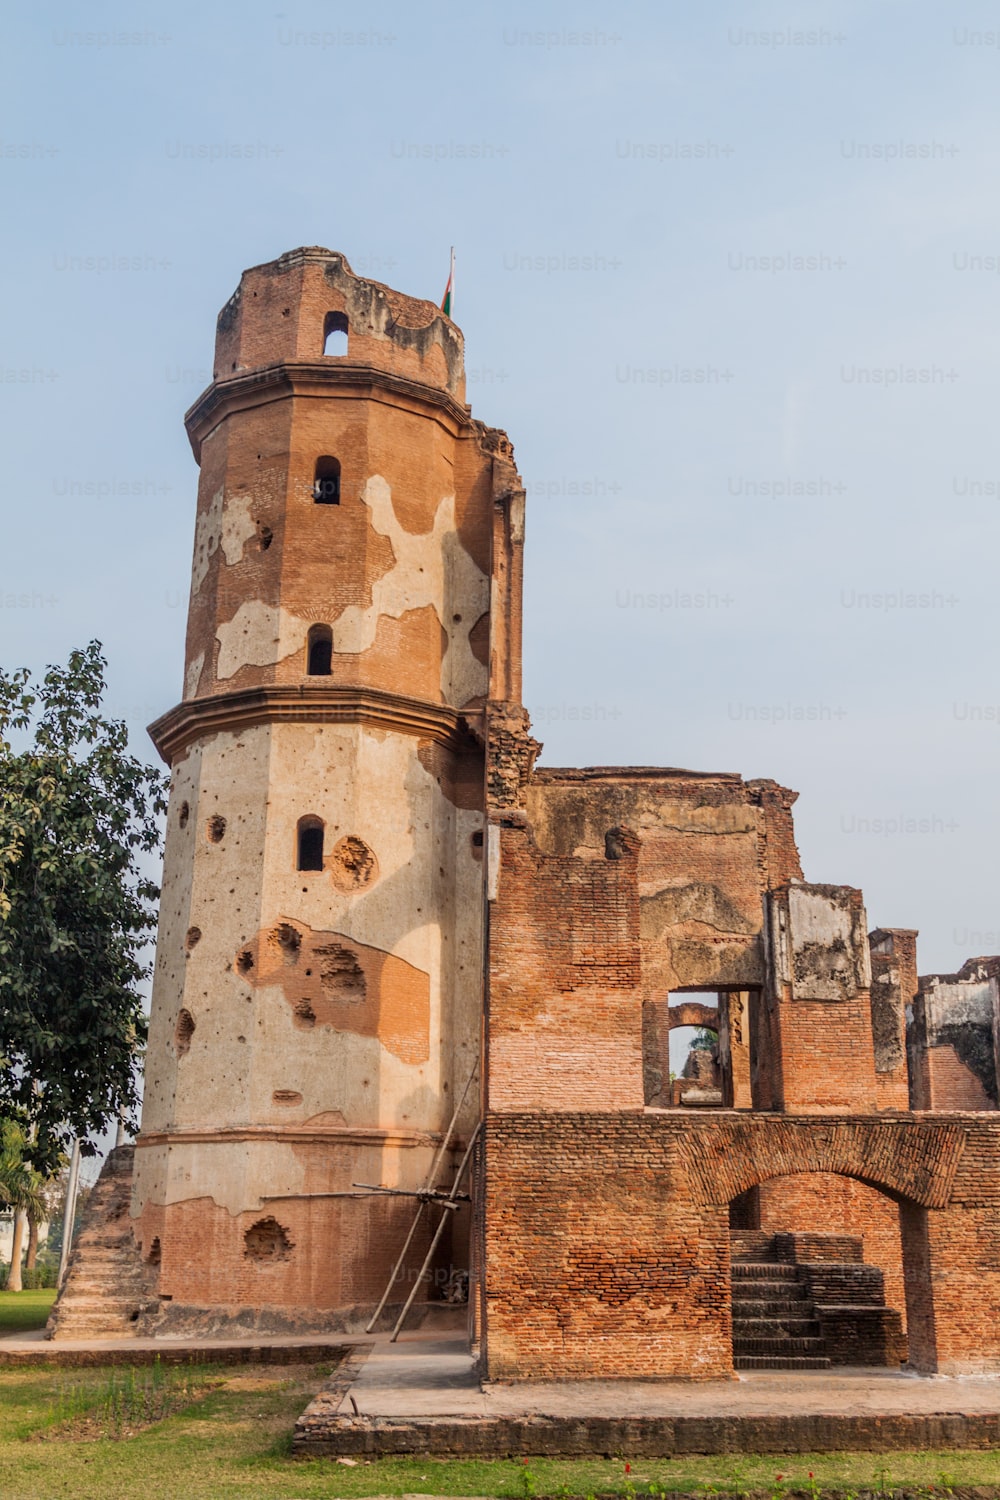 Ruins of the Residency Complex in Lucknow, Uttar Pradesh state, India